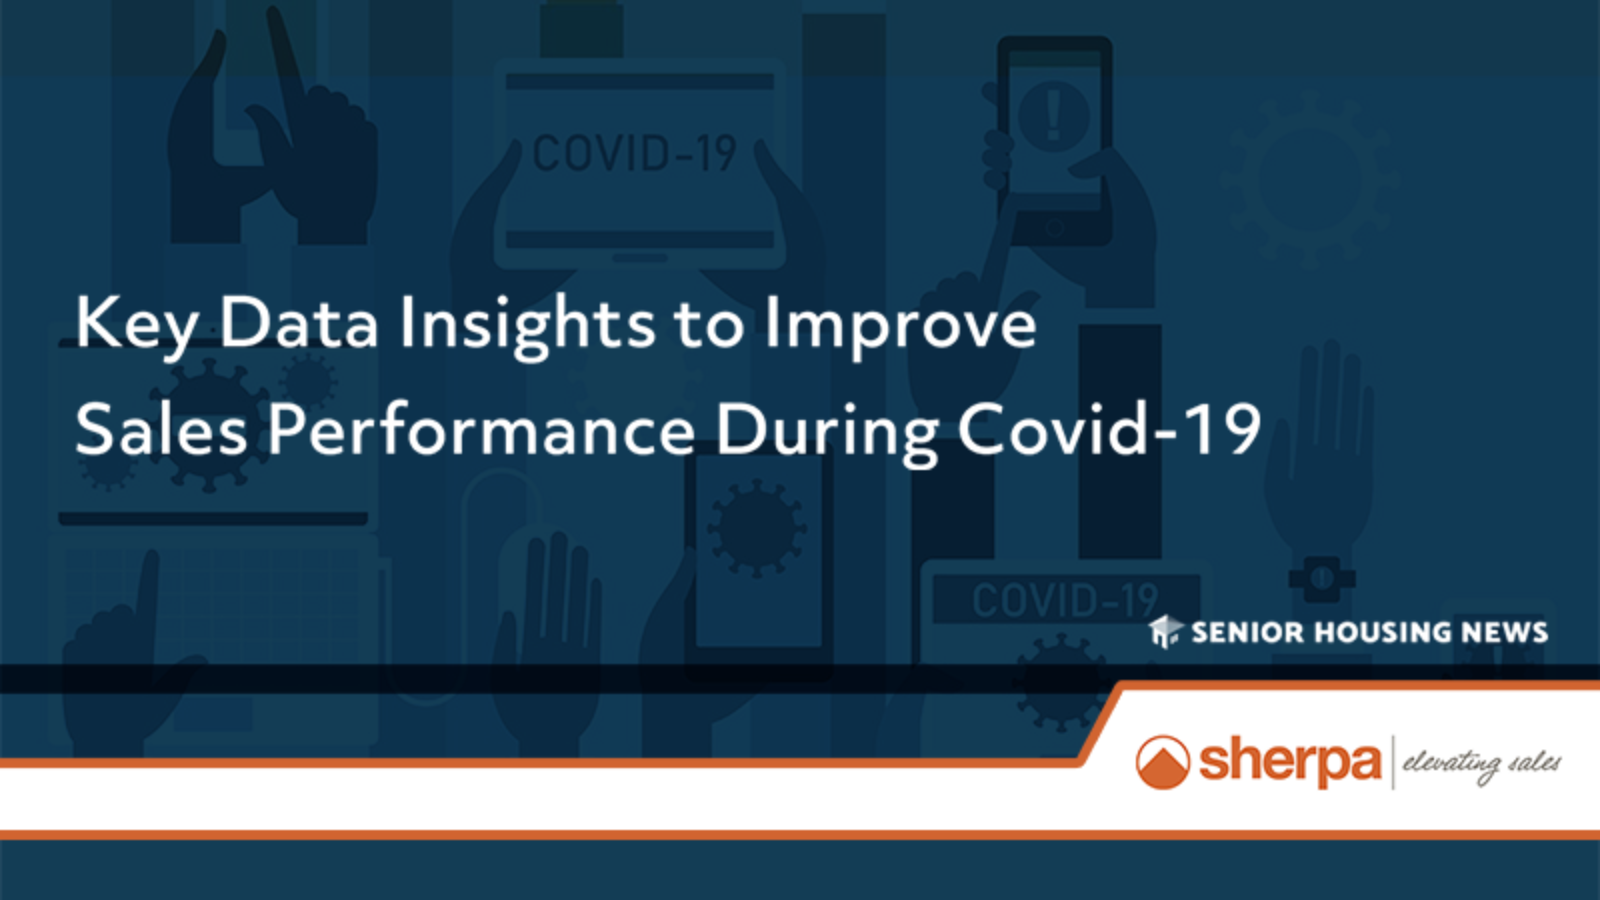 Key Data Insights to Improve Sales Performance During Covid-19